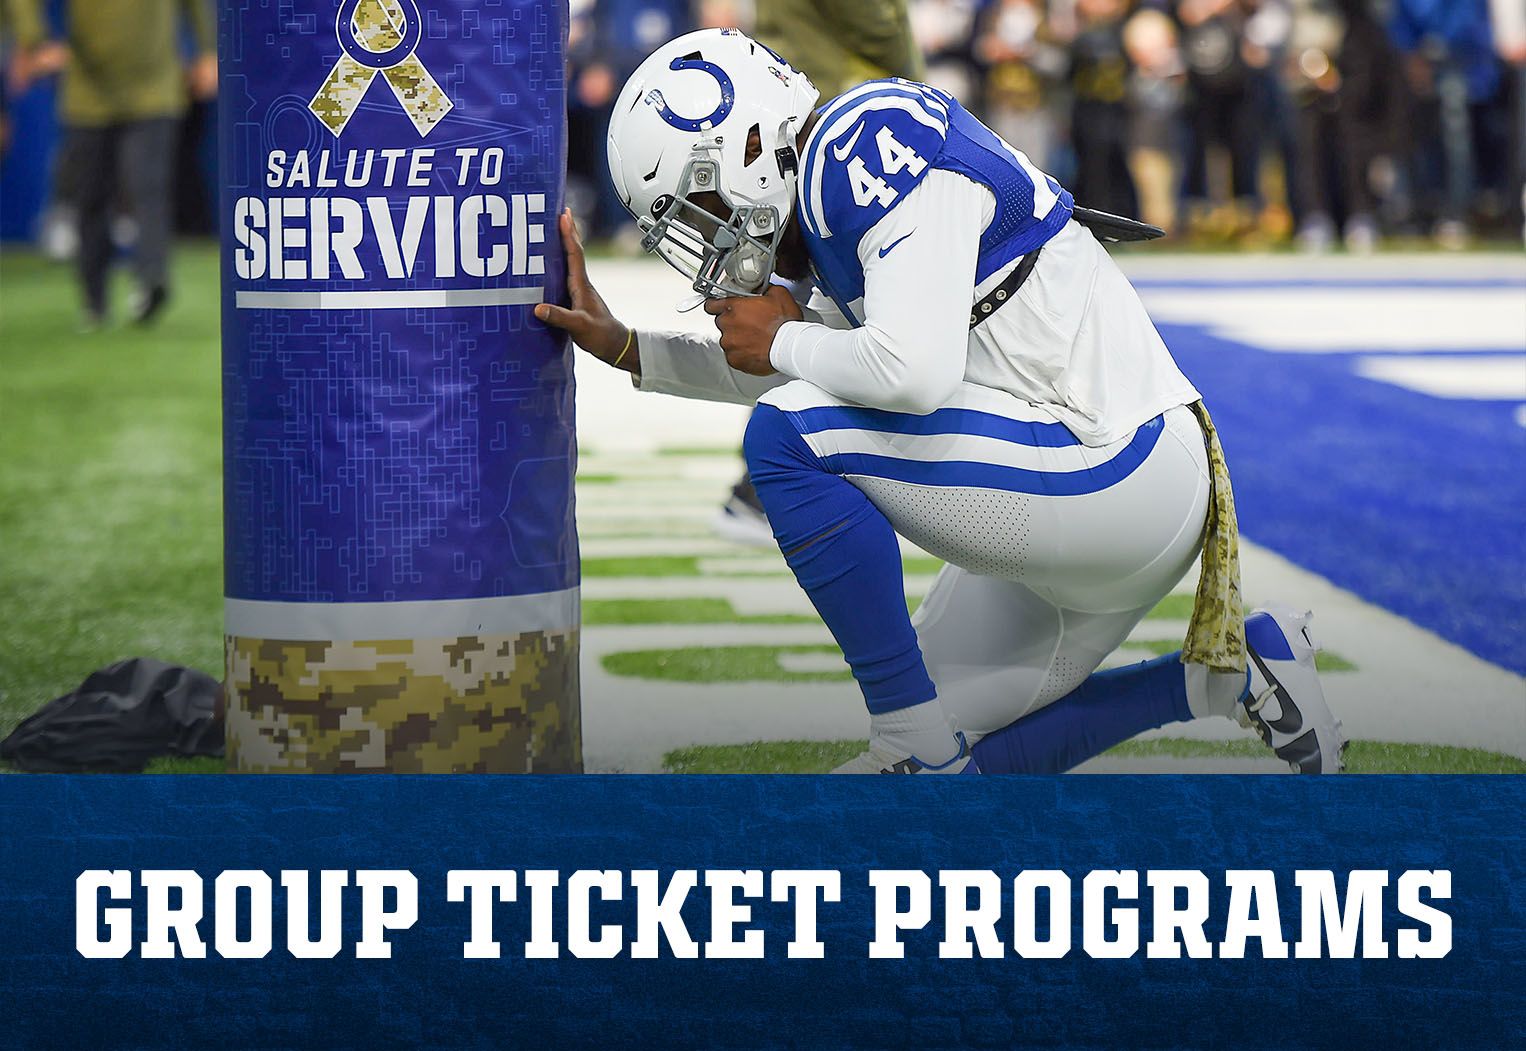 Here's how to get Colts tickets for $40